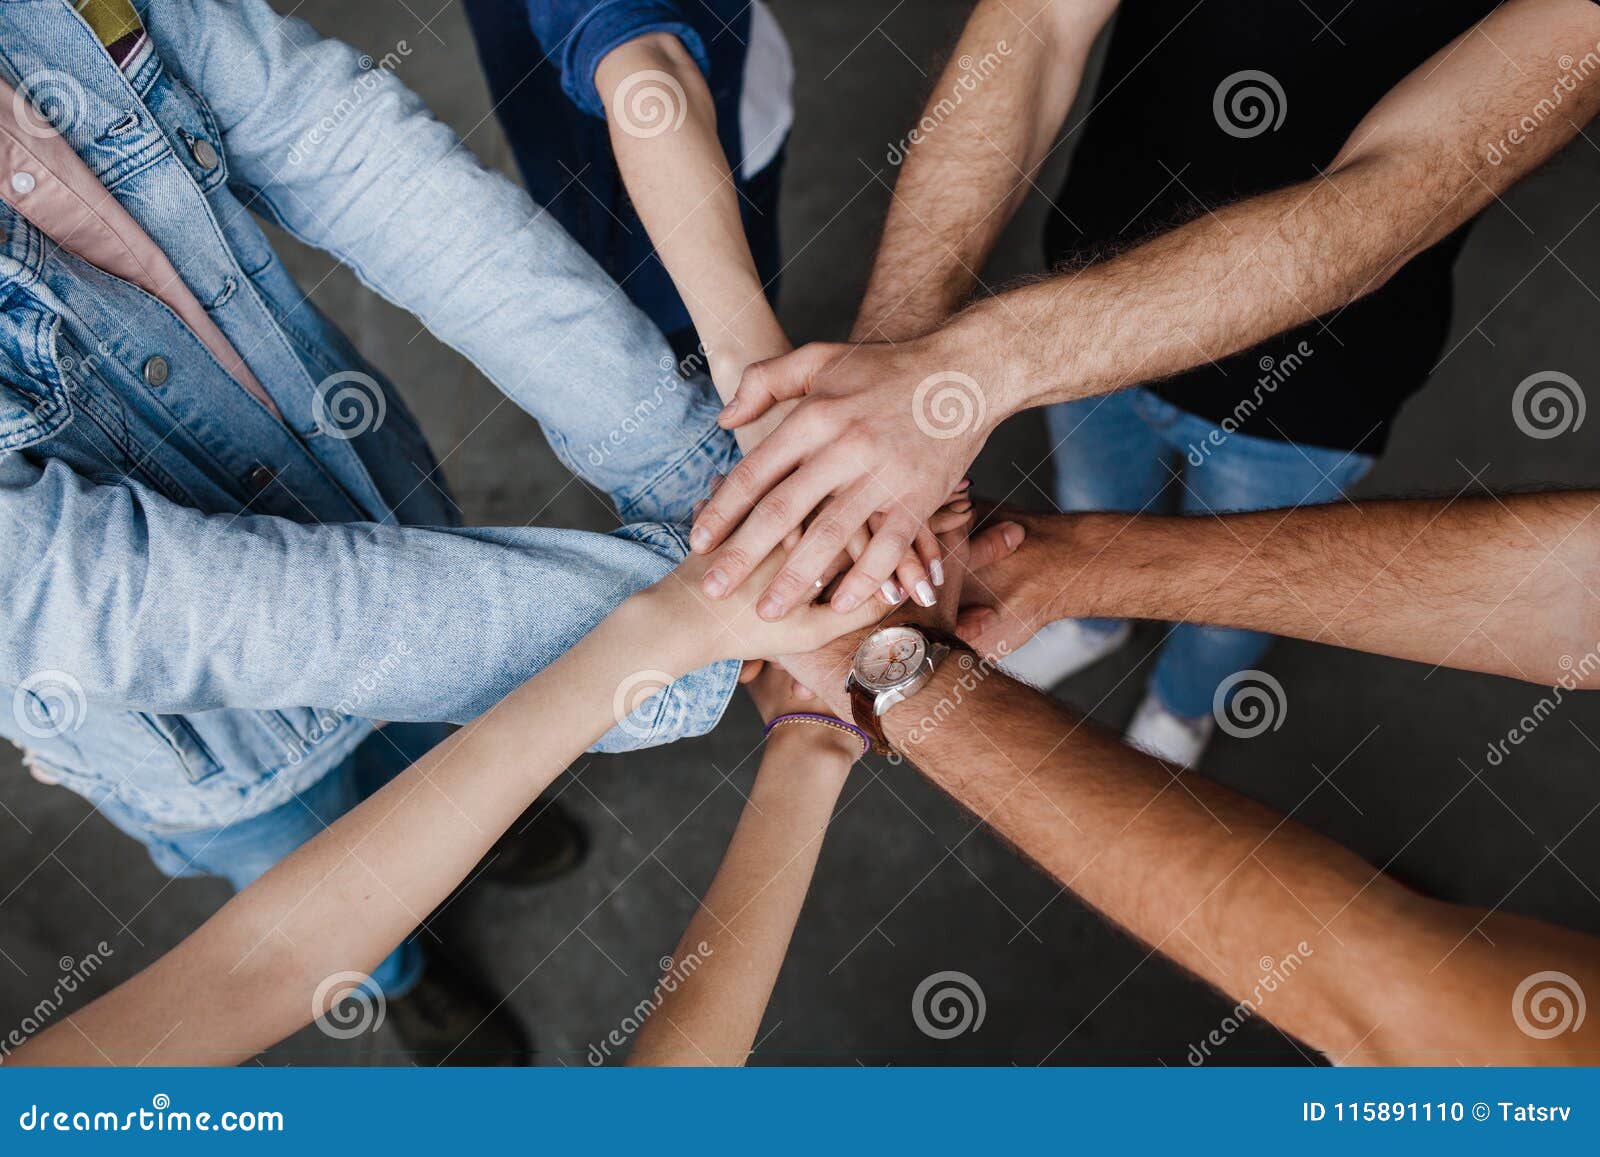 team put hands together, show connection and alliance, teambuilding in office, young businessmen and women in casual